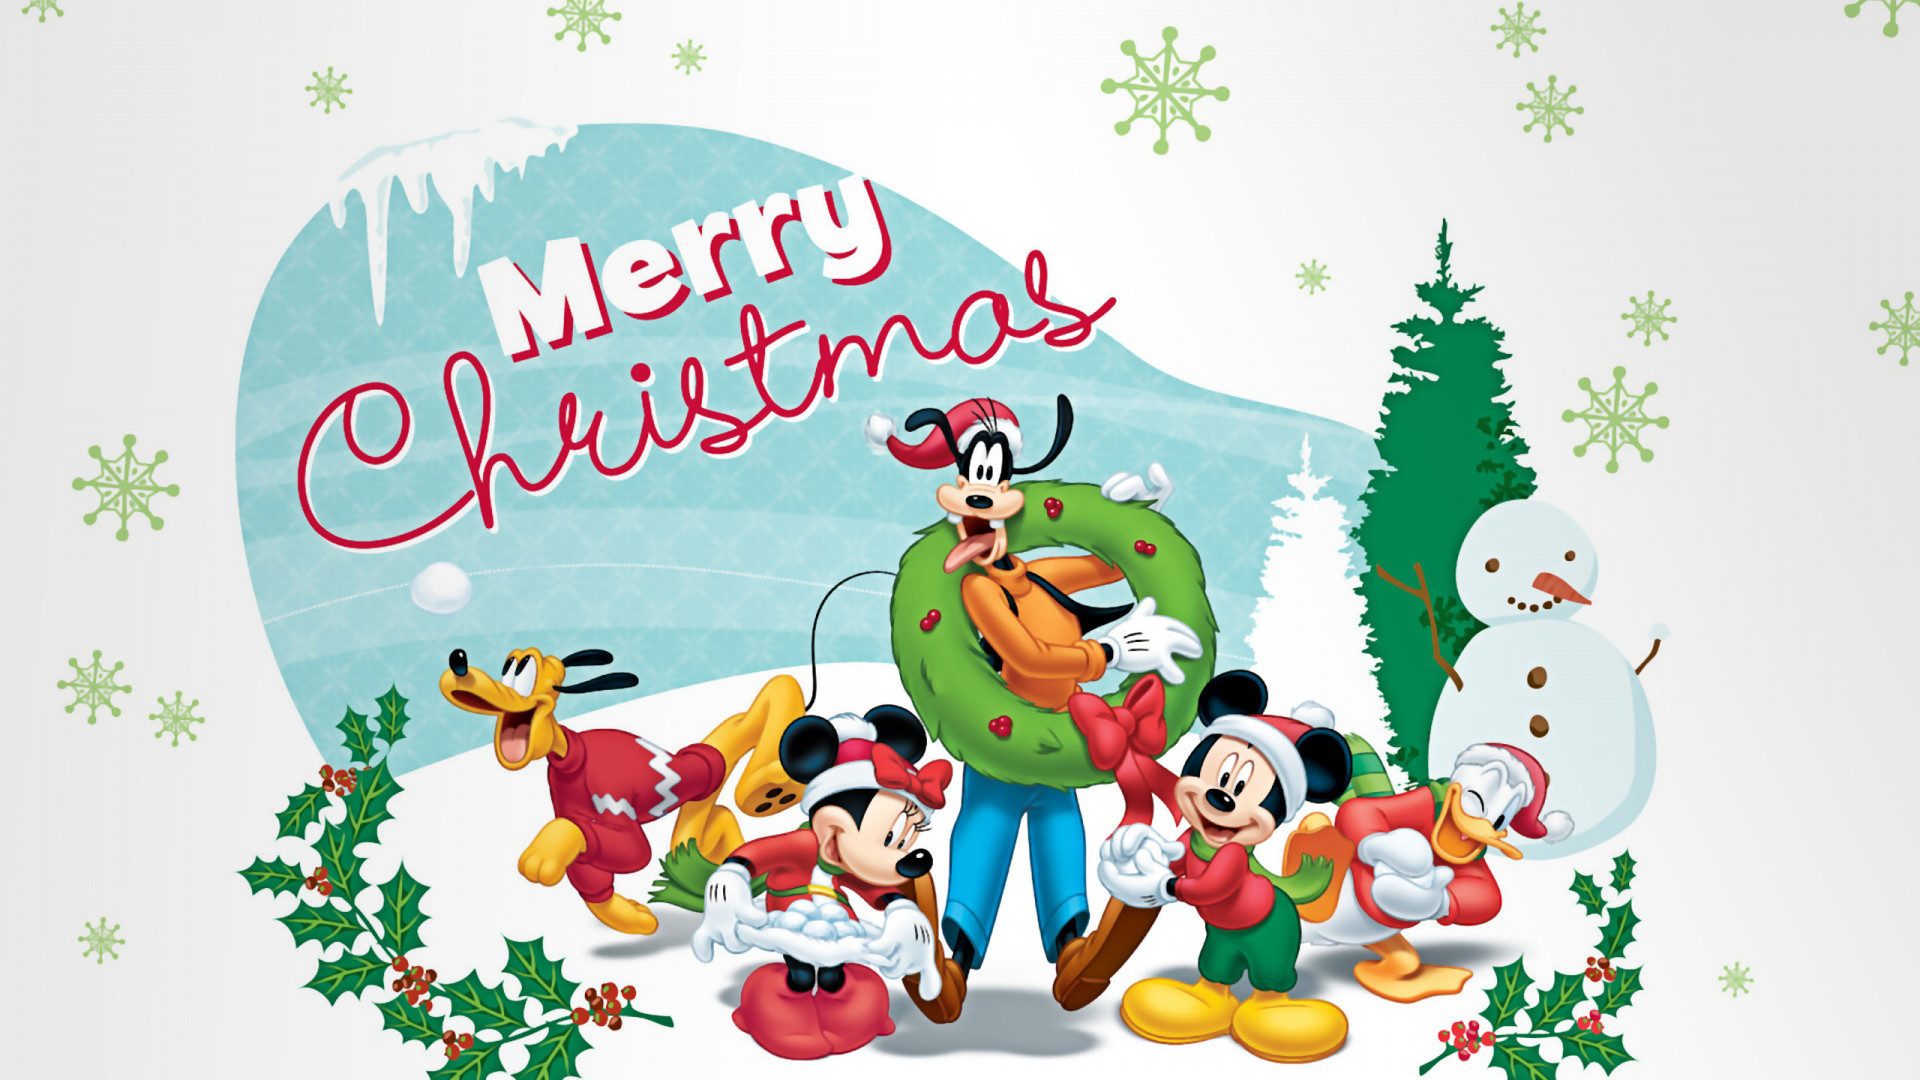 1920x1080 Download Merry Christmas Wishes Disney Wallpaper For Free